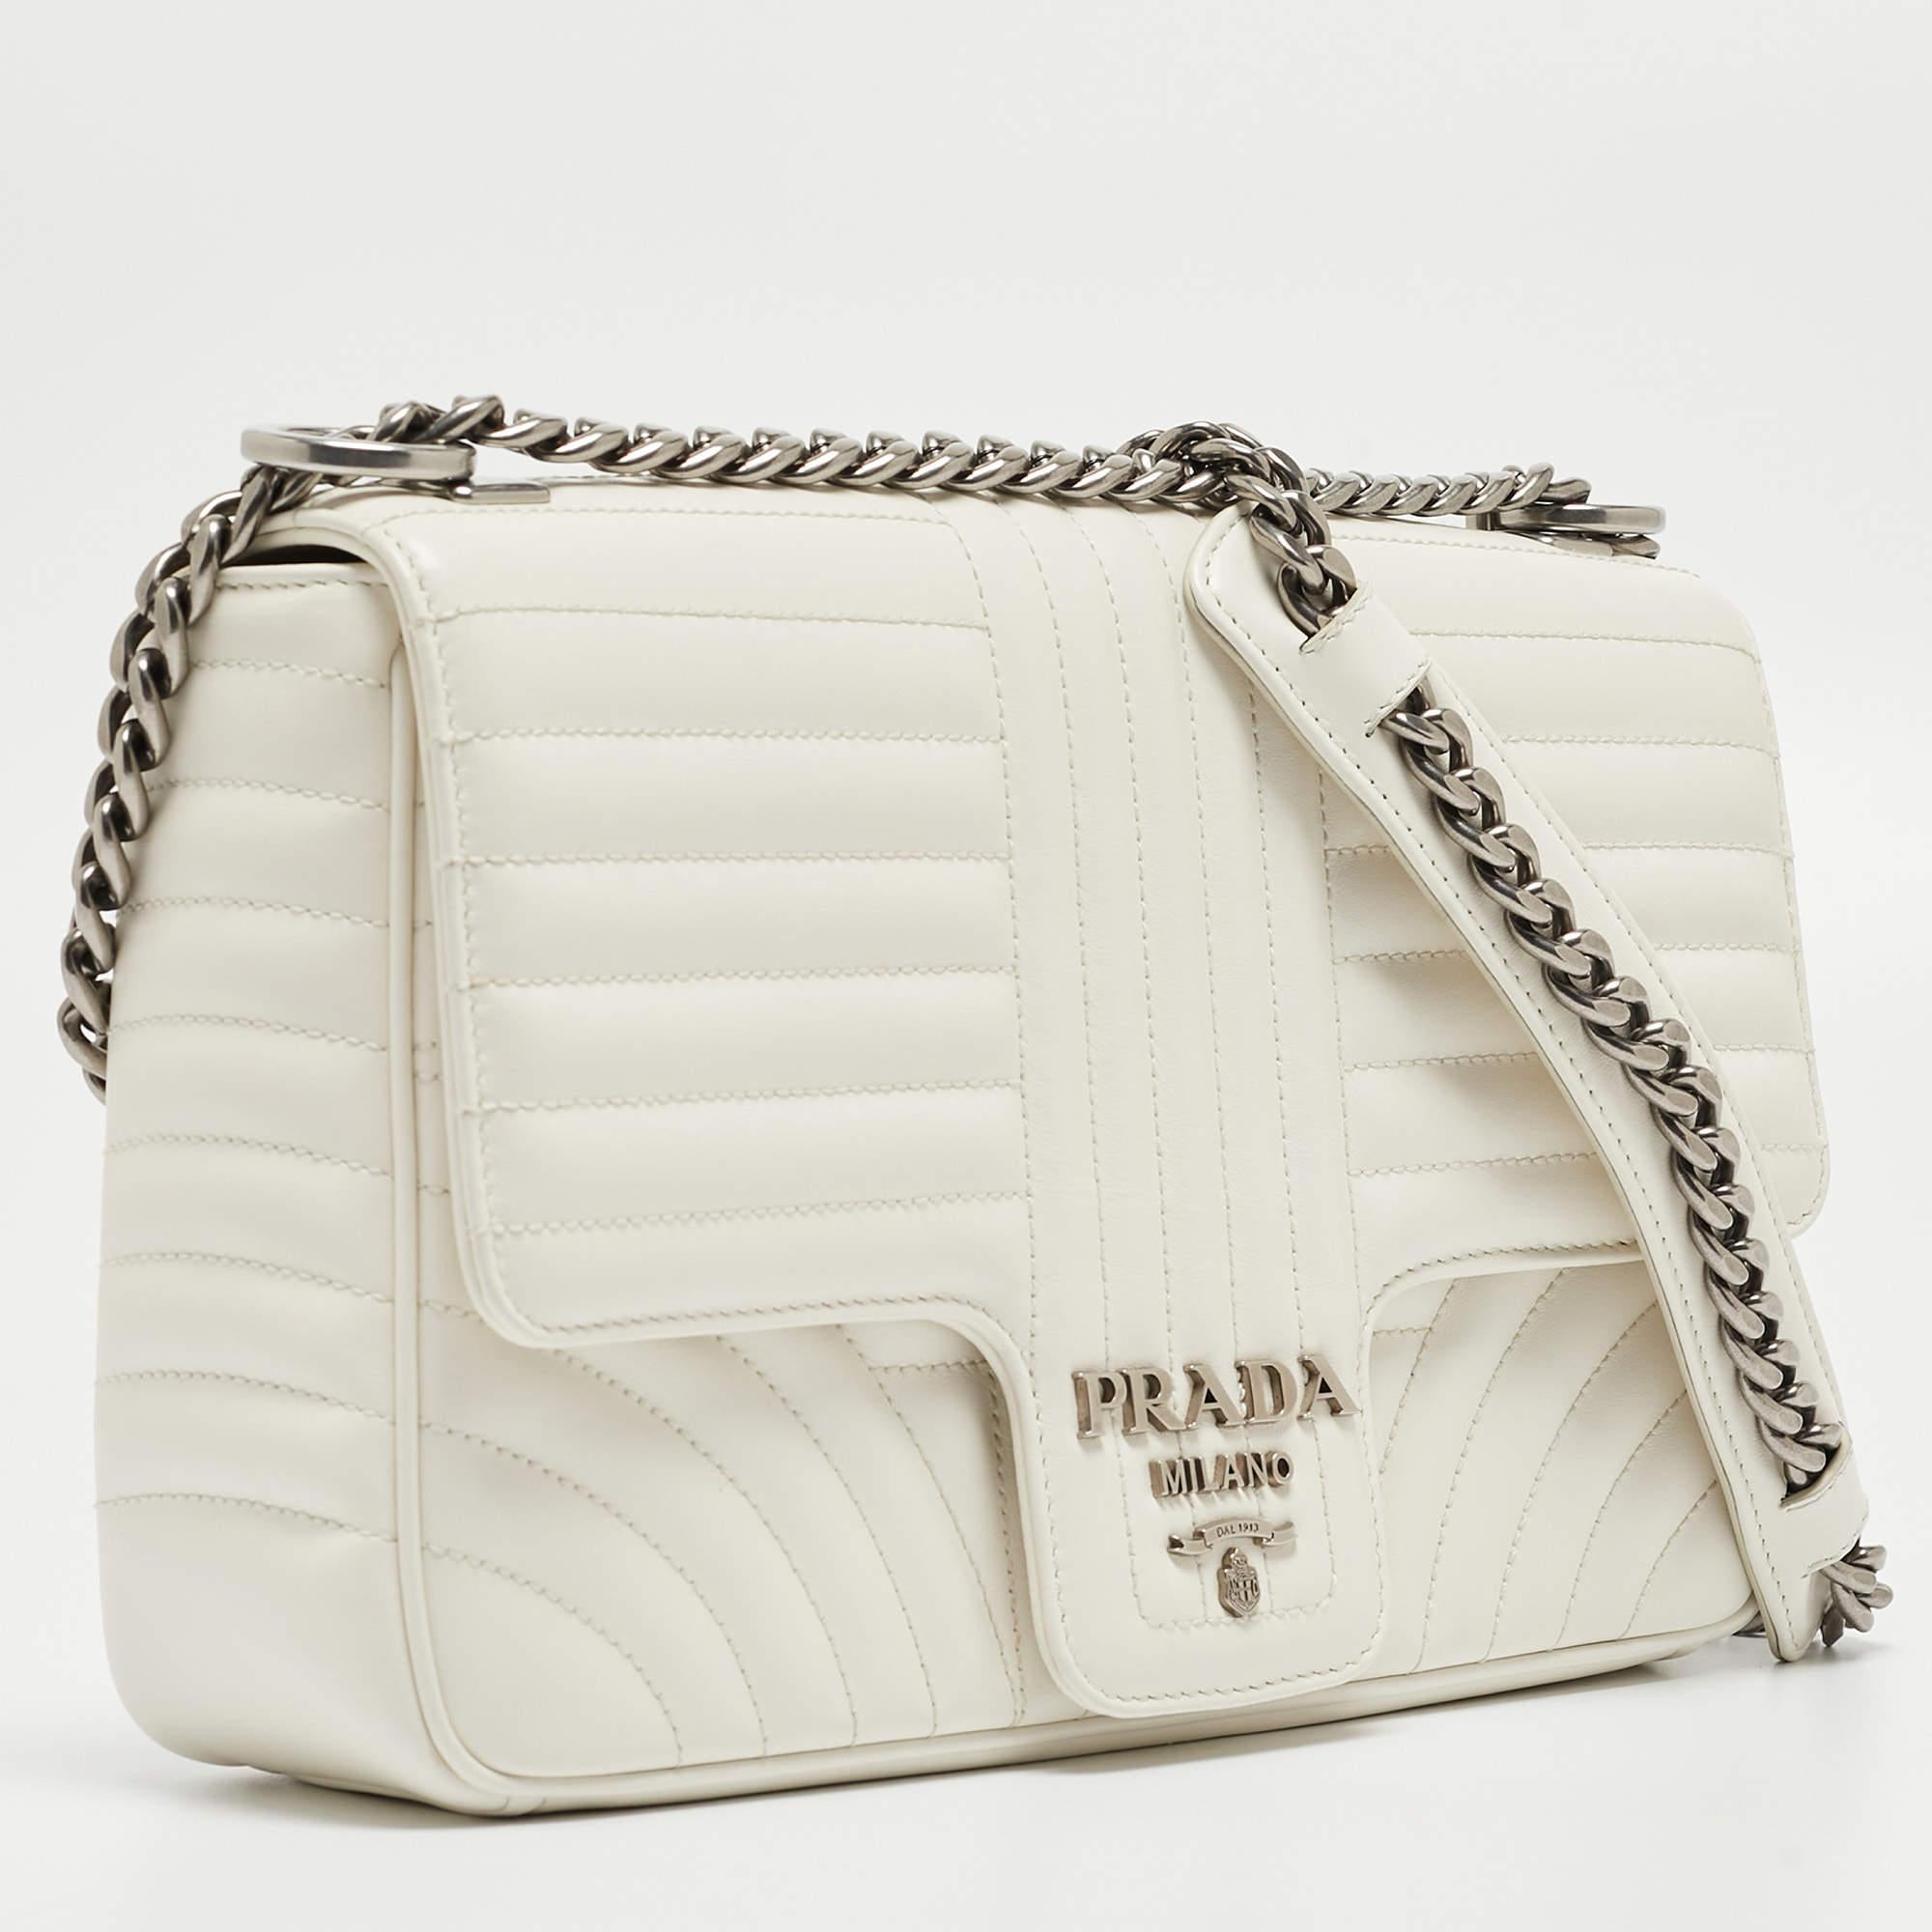 Prada brings you one such fabulous bag meticulously made from leather carrying a quilted pattern all over. This shoulder bag comes with a front flap detailed with the brand logo in gold-tone. It has a nylon-lined interior featuring a zip pocket. The